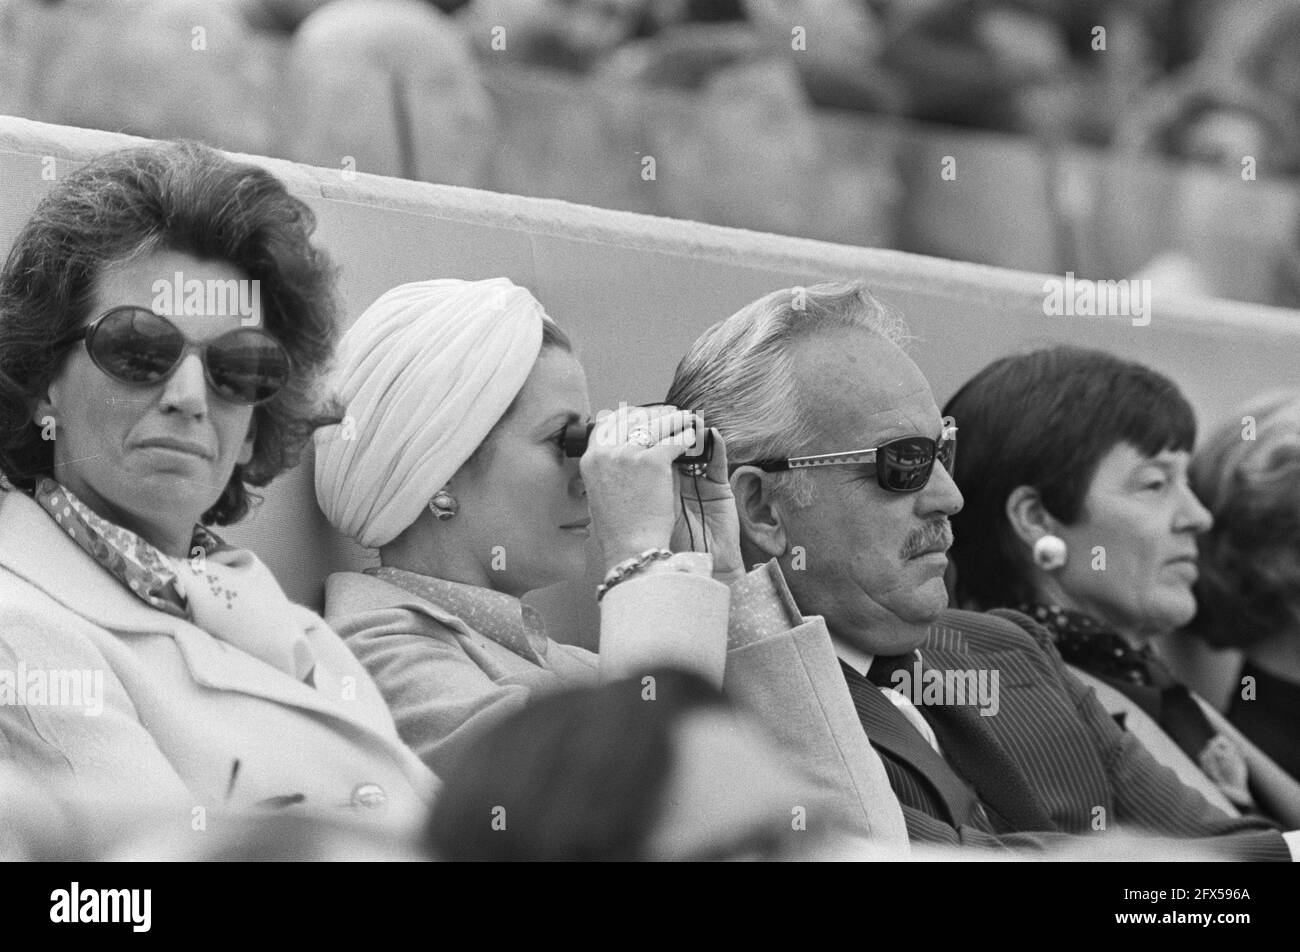 Finals World Cup 1974 in Munich, West Germany v Netherlands 2-1; Nos. 30, 31 Princess Gracia and Prince Rainier, July 7, 1974, finals, sports, soccer, world championships, The Netherlands, 20th century press agency photo, news to remember, documentary, historic photography 1945-1990, visual stories, human history of the Twentieth Century, capturing moments in time Stock Photo